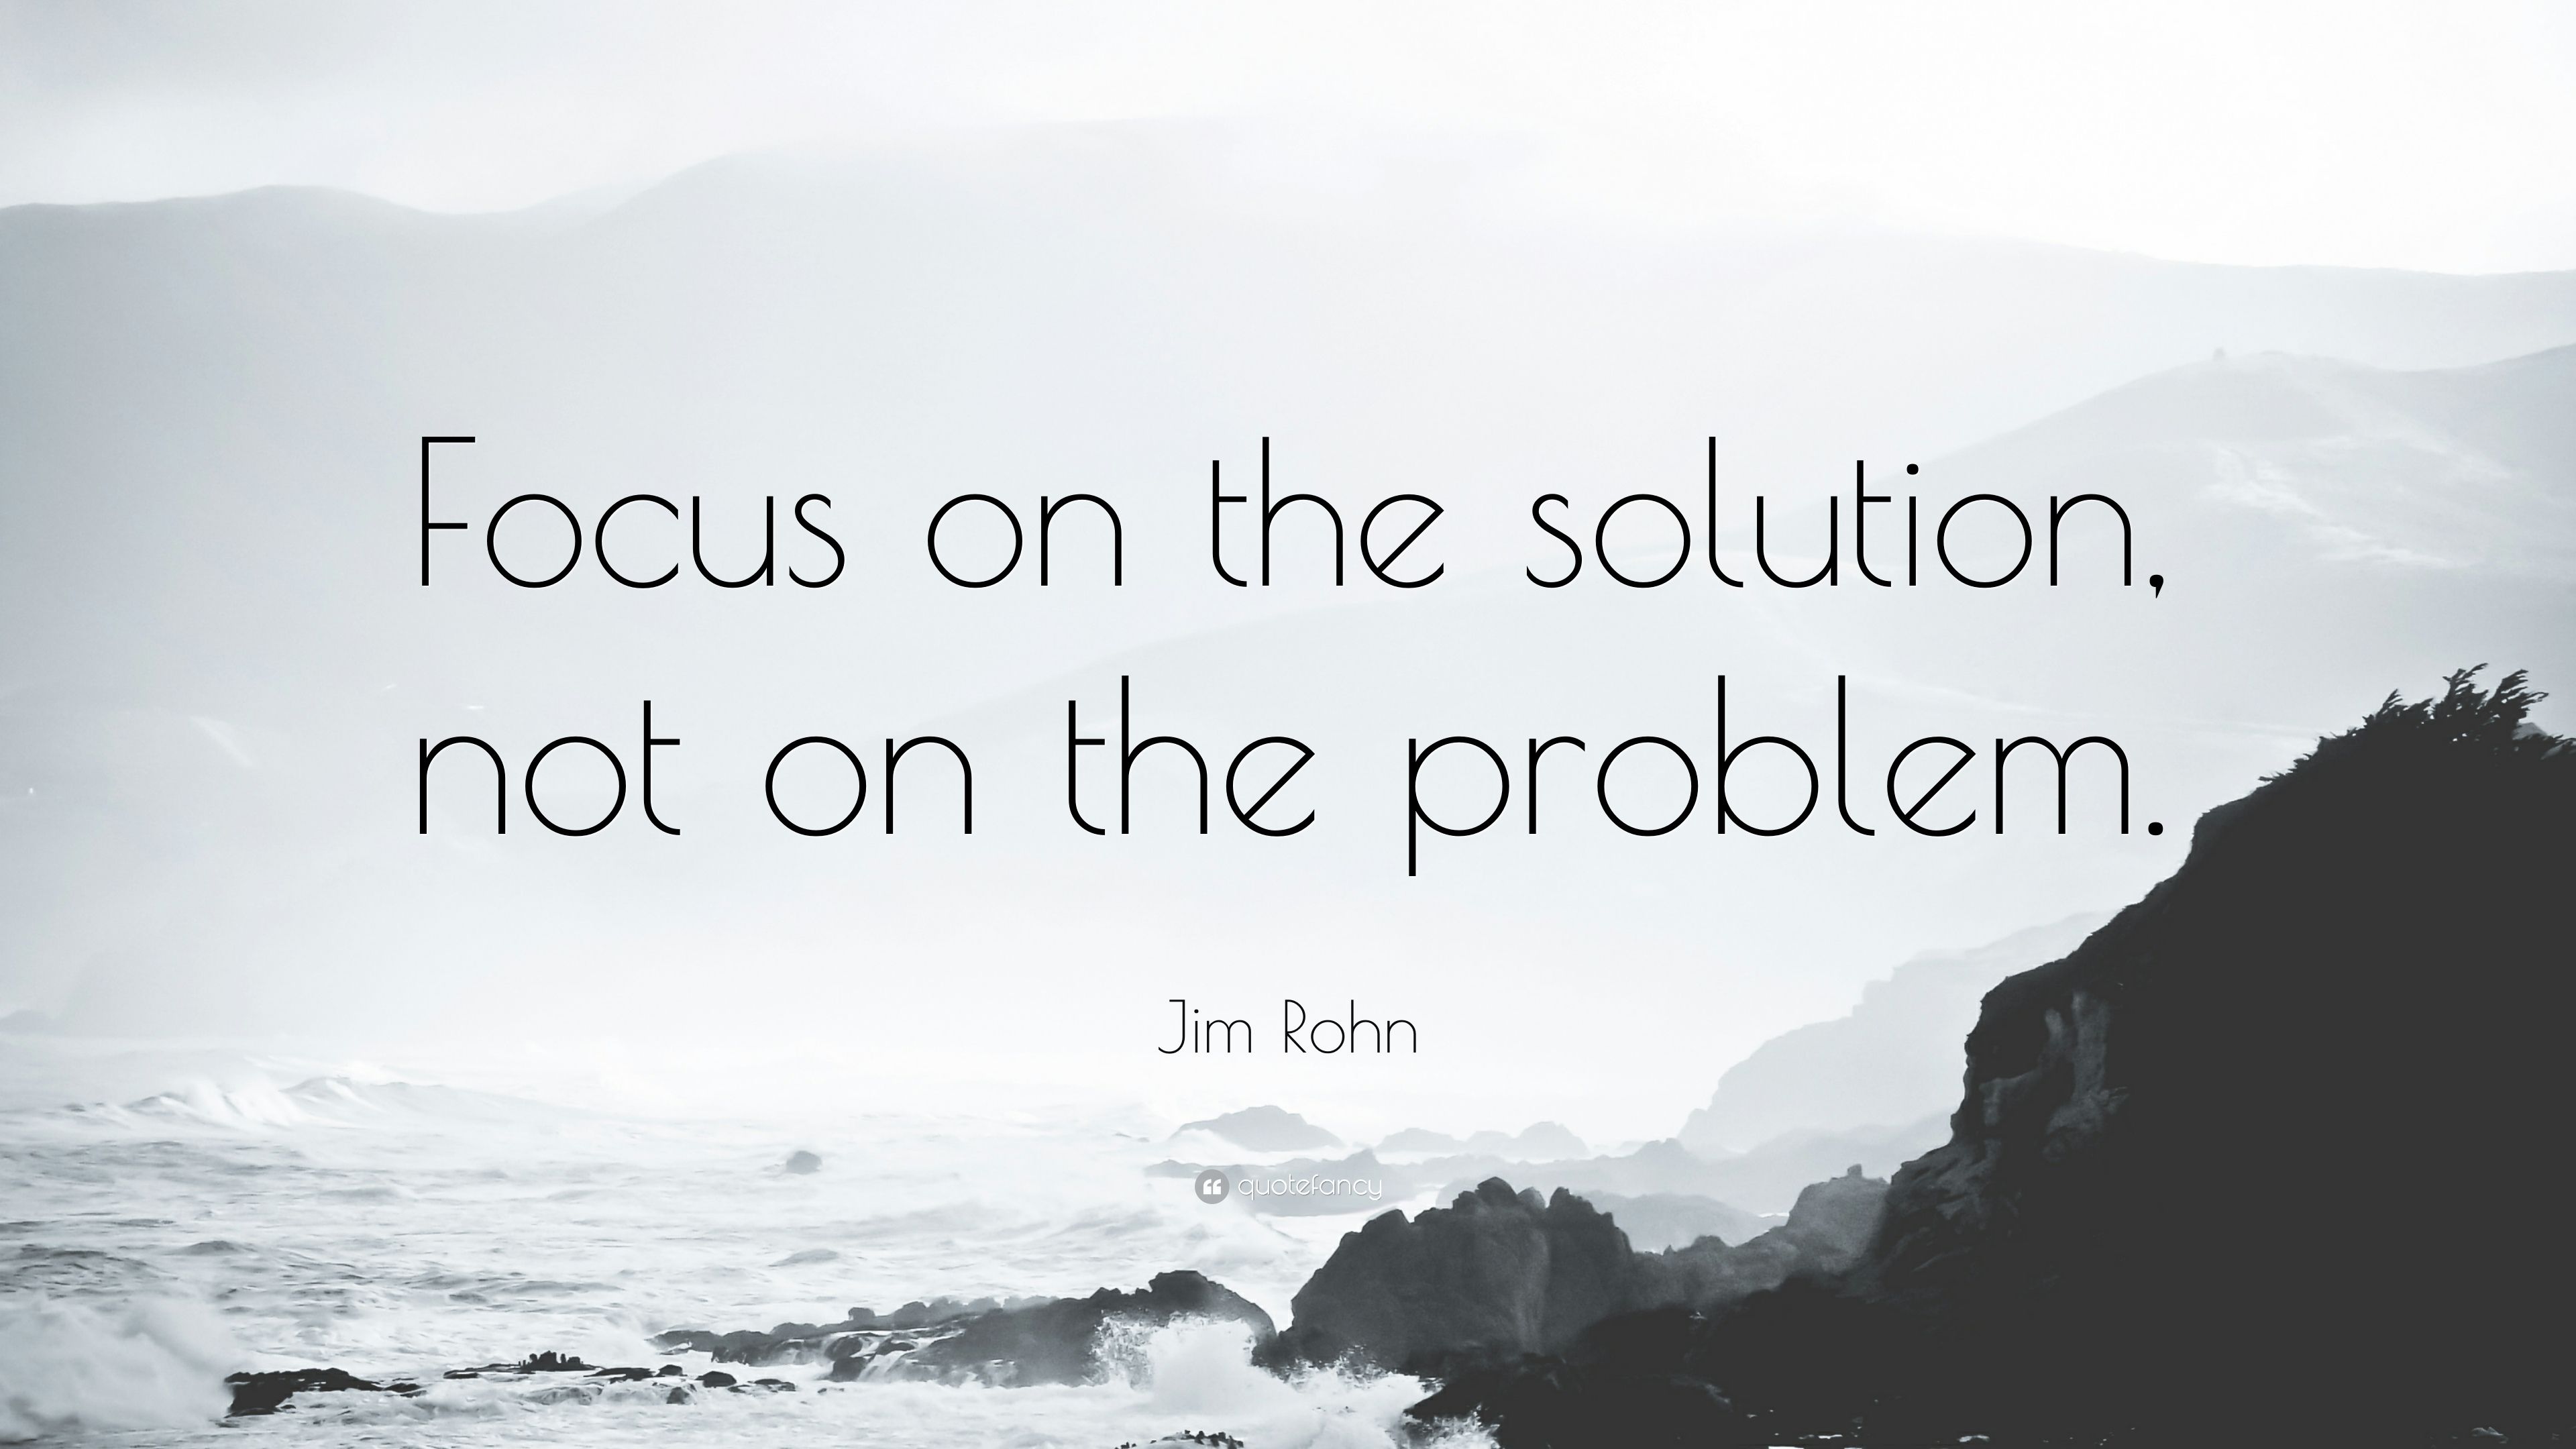 Jim Rohn Quote: “Focus on the solution, not on the problem.” (12 wallpaper)